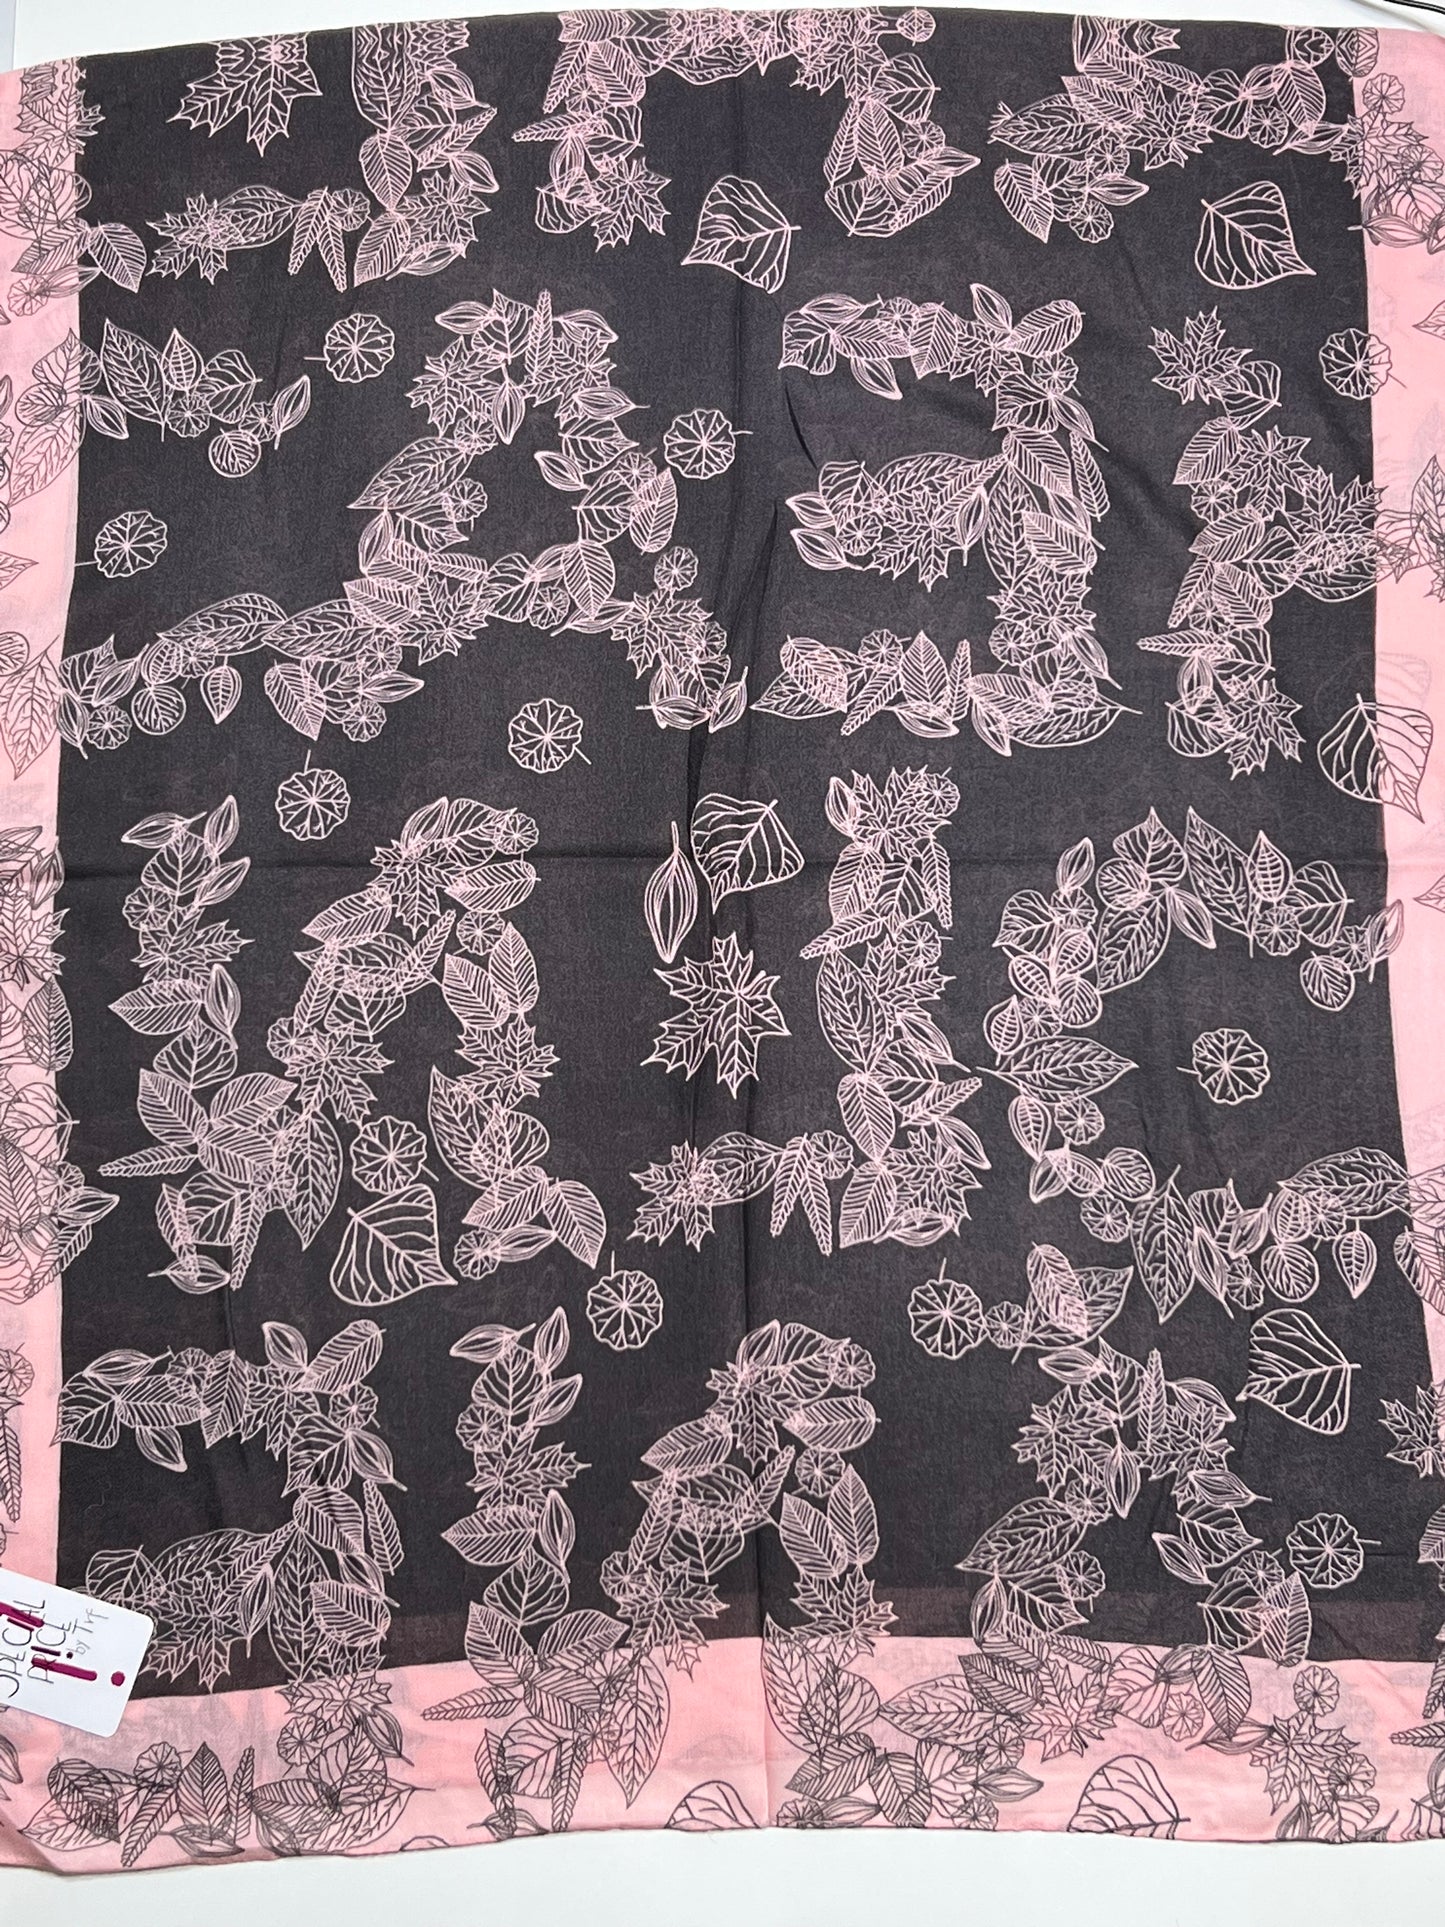 Printed Viscose Scarf For Women